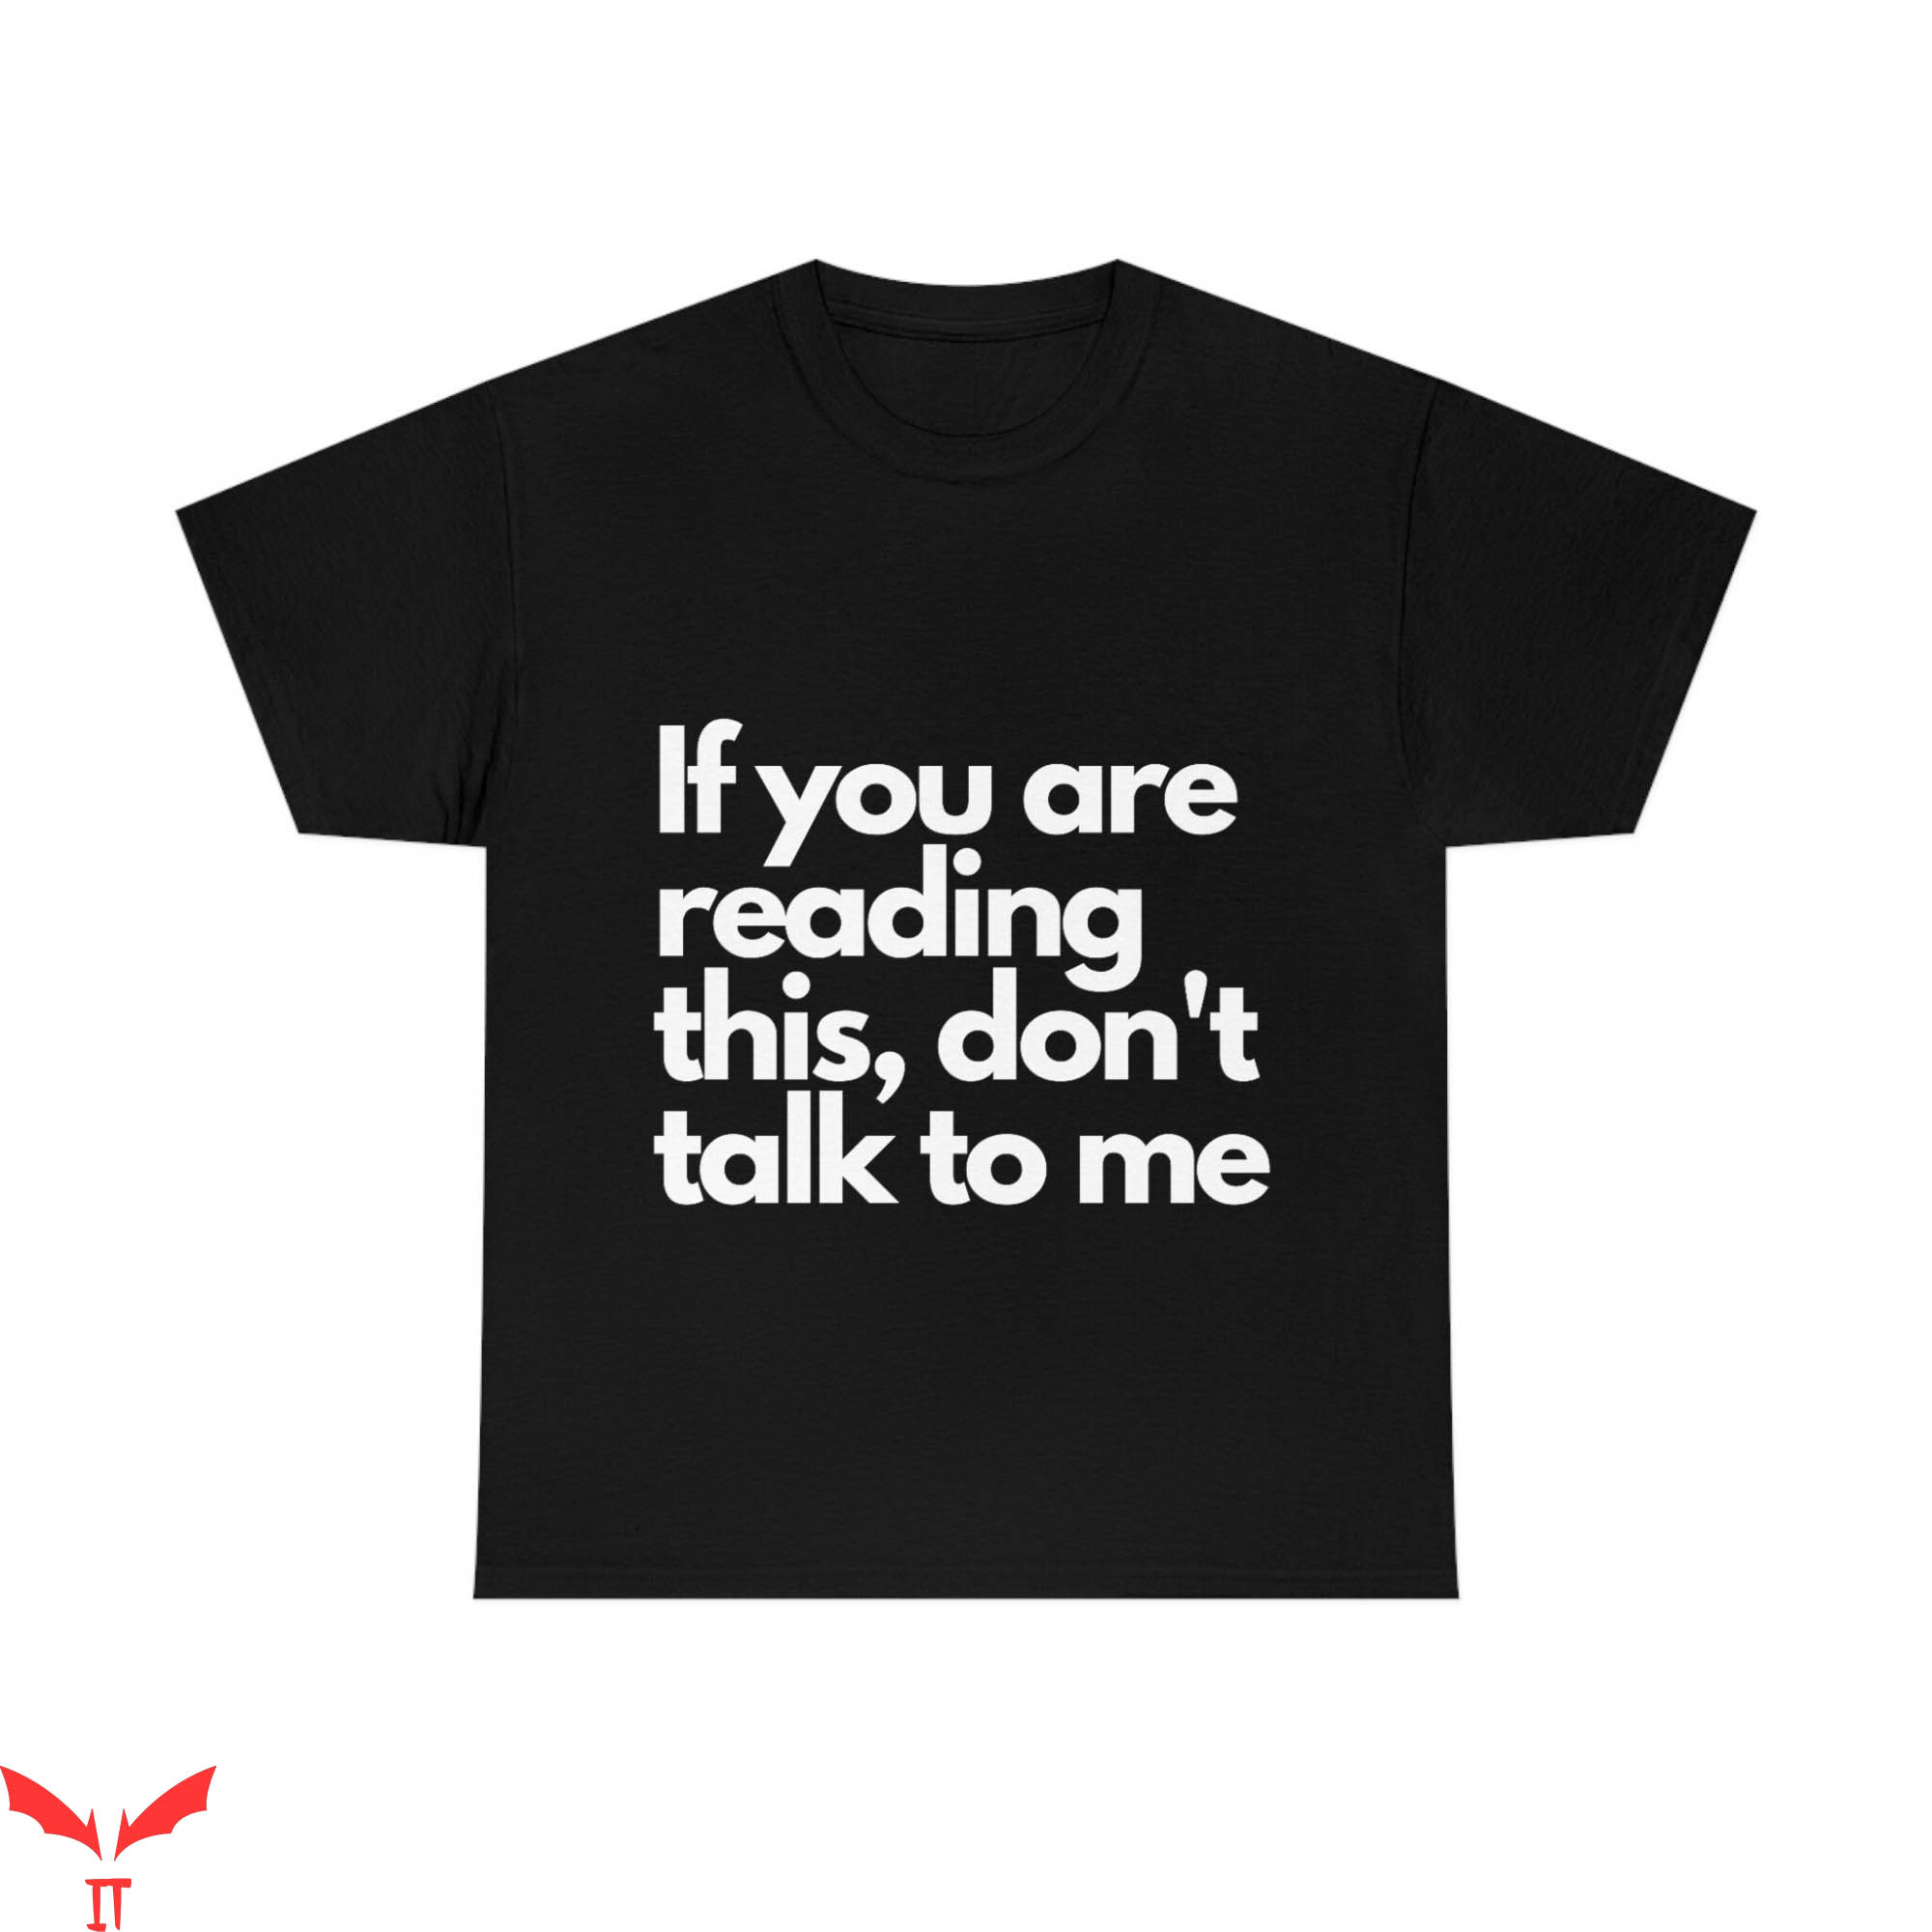 Don't Talk To Me T-Shirt If You Are Reading This Tee Shirt